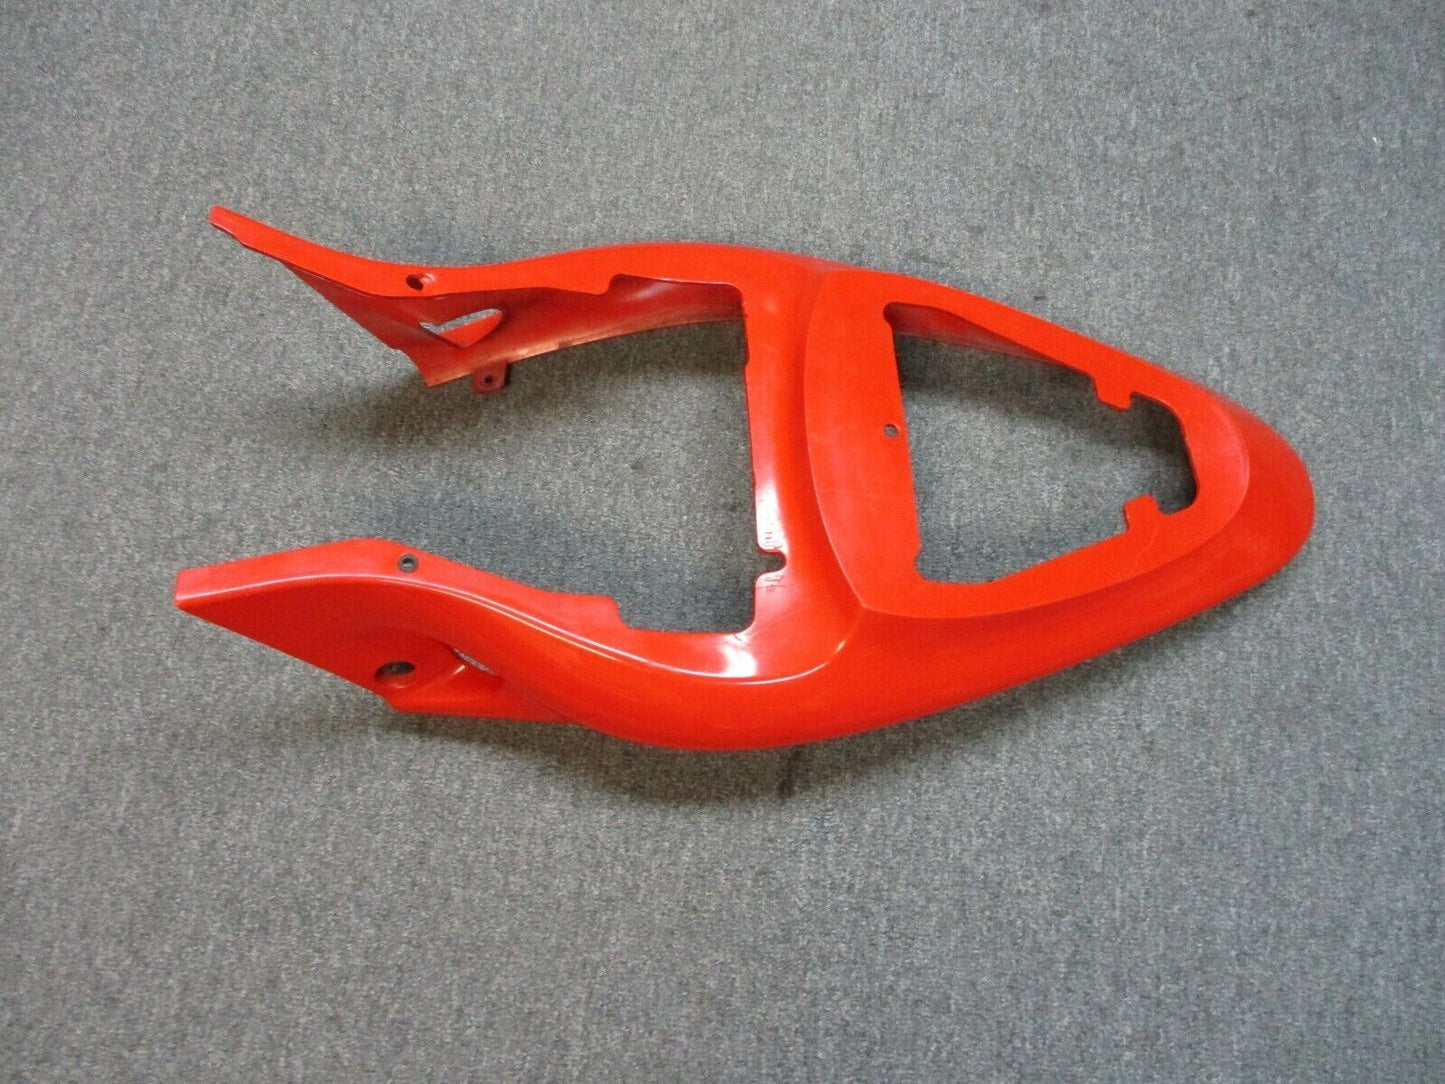 08-10 Buell 1125R Red Seat Tail Section M0664-02A8